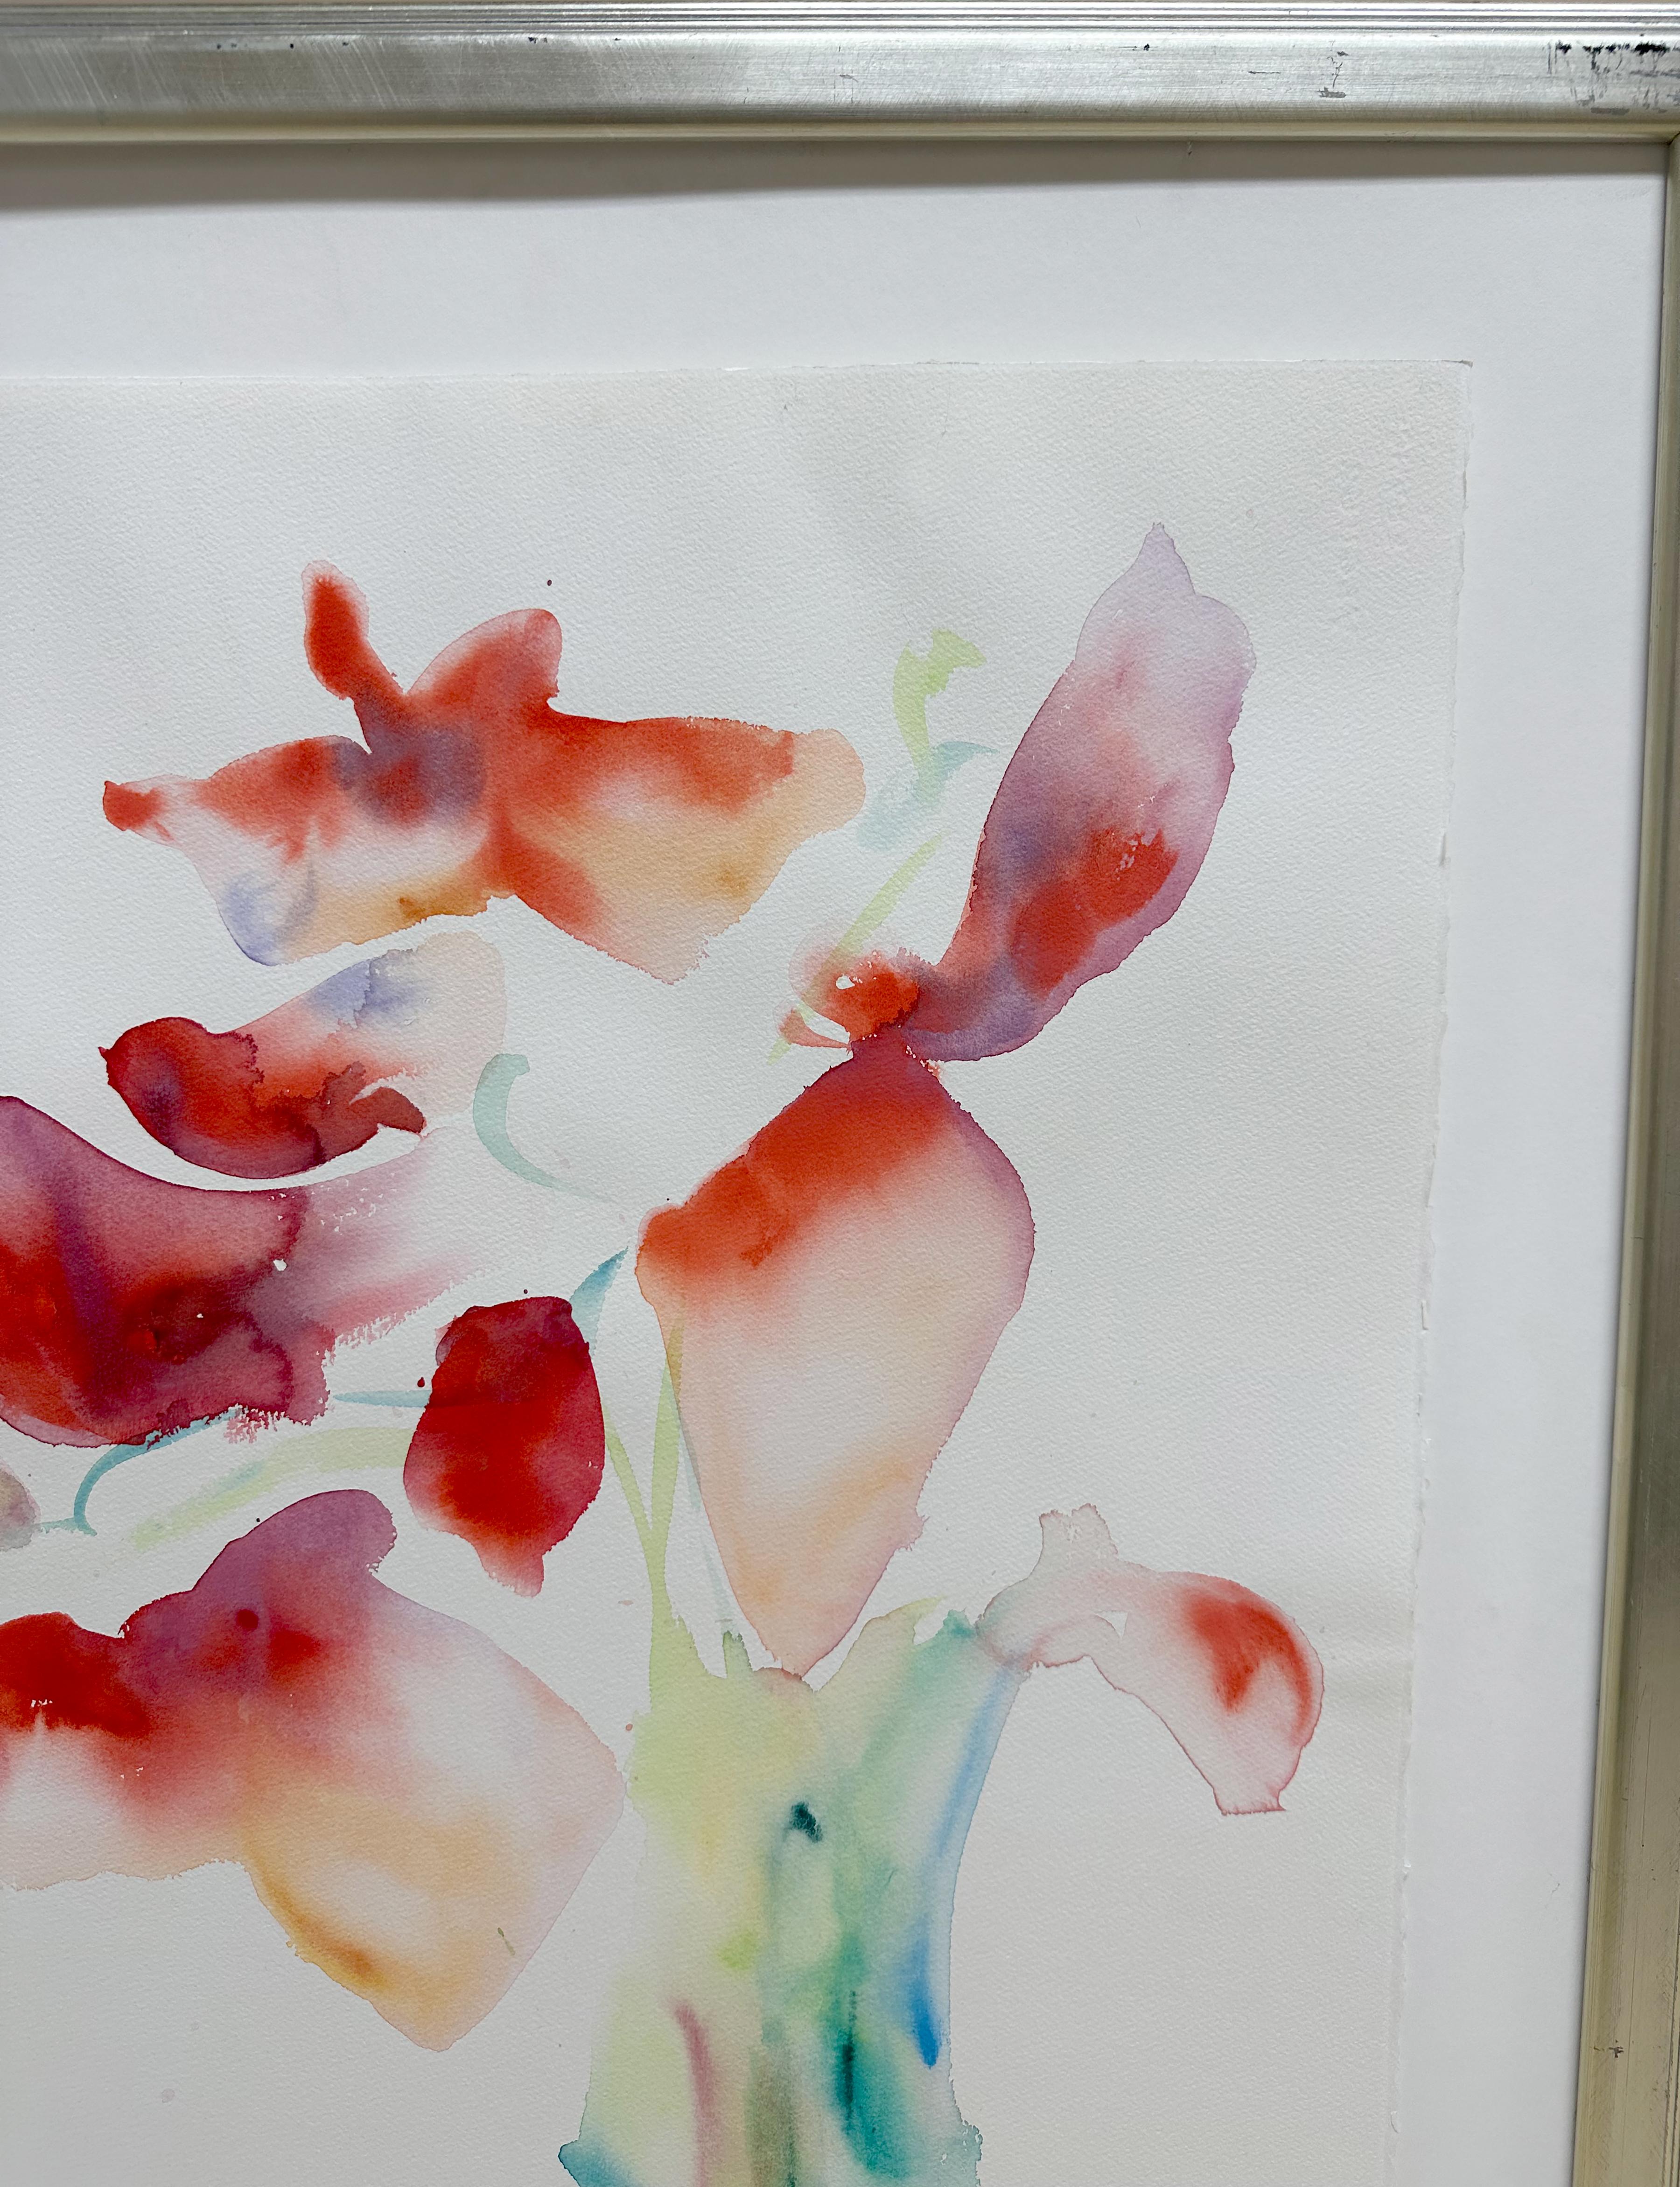 An elegant and vibrant framed original floral watercolor painting. both minimal and soulful in its use of color. Painting by artist J. George. Silver frame with a glass cover and a white matte. The framed abstract floral form is made up of subtle